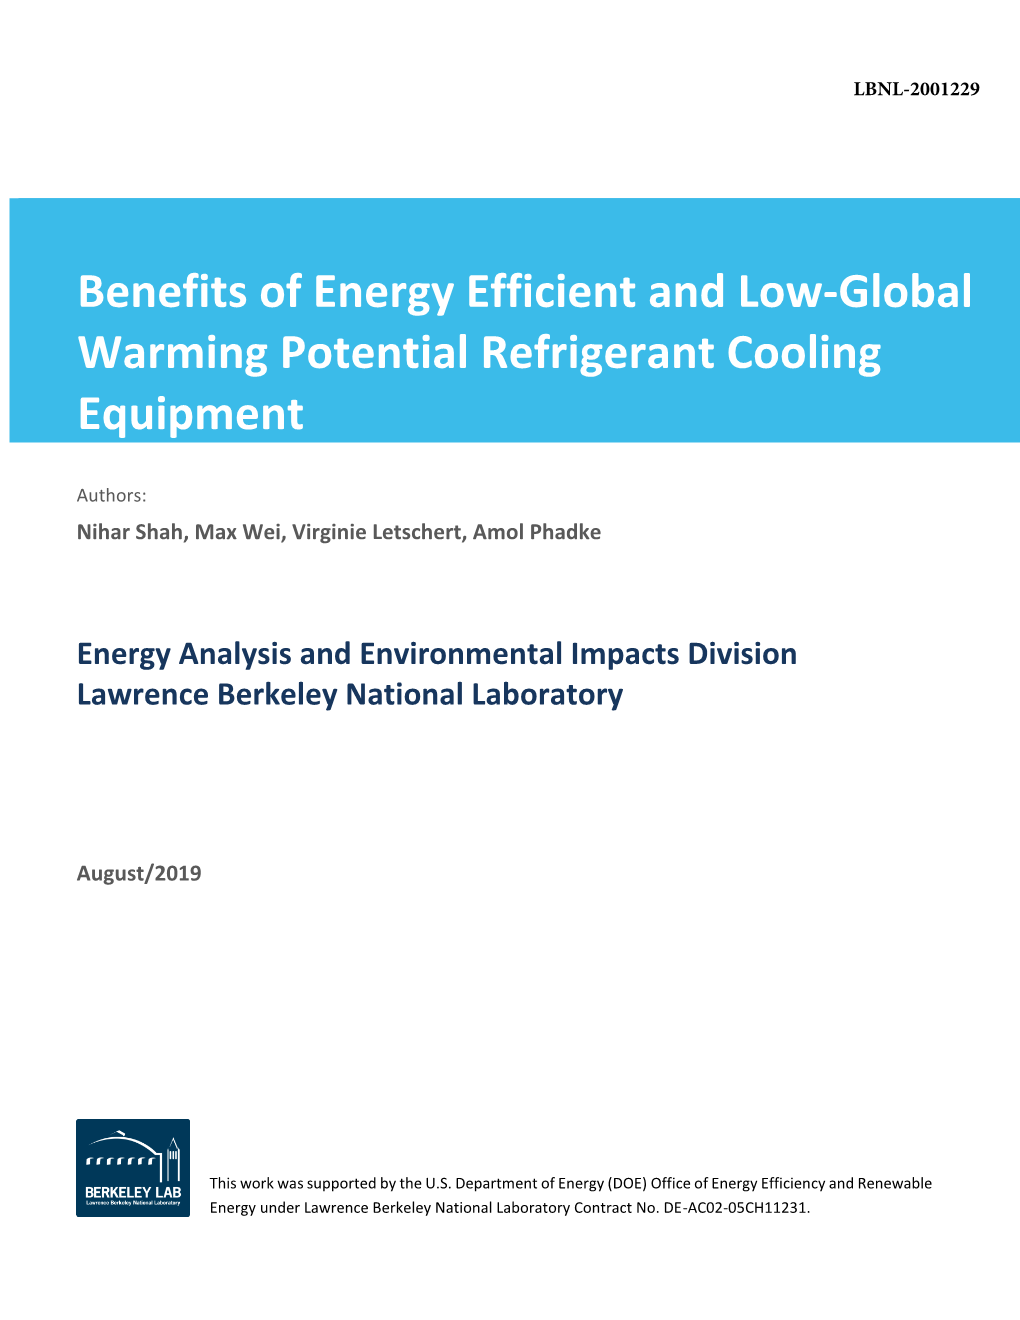 Benefits of Energy Efficient and Low-Global Warming Potential Refrigerant Cooling Equipment